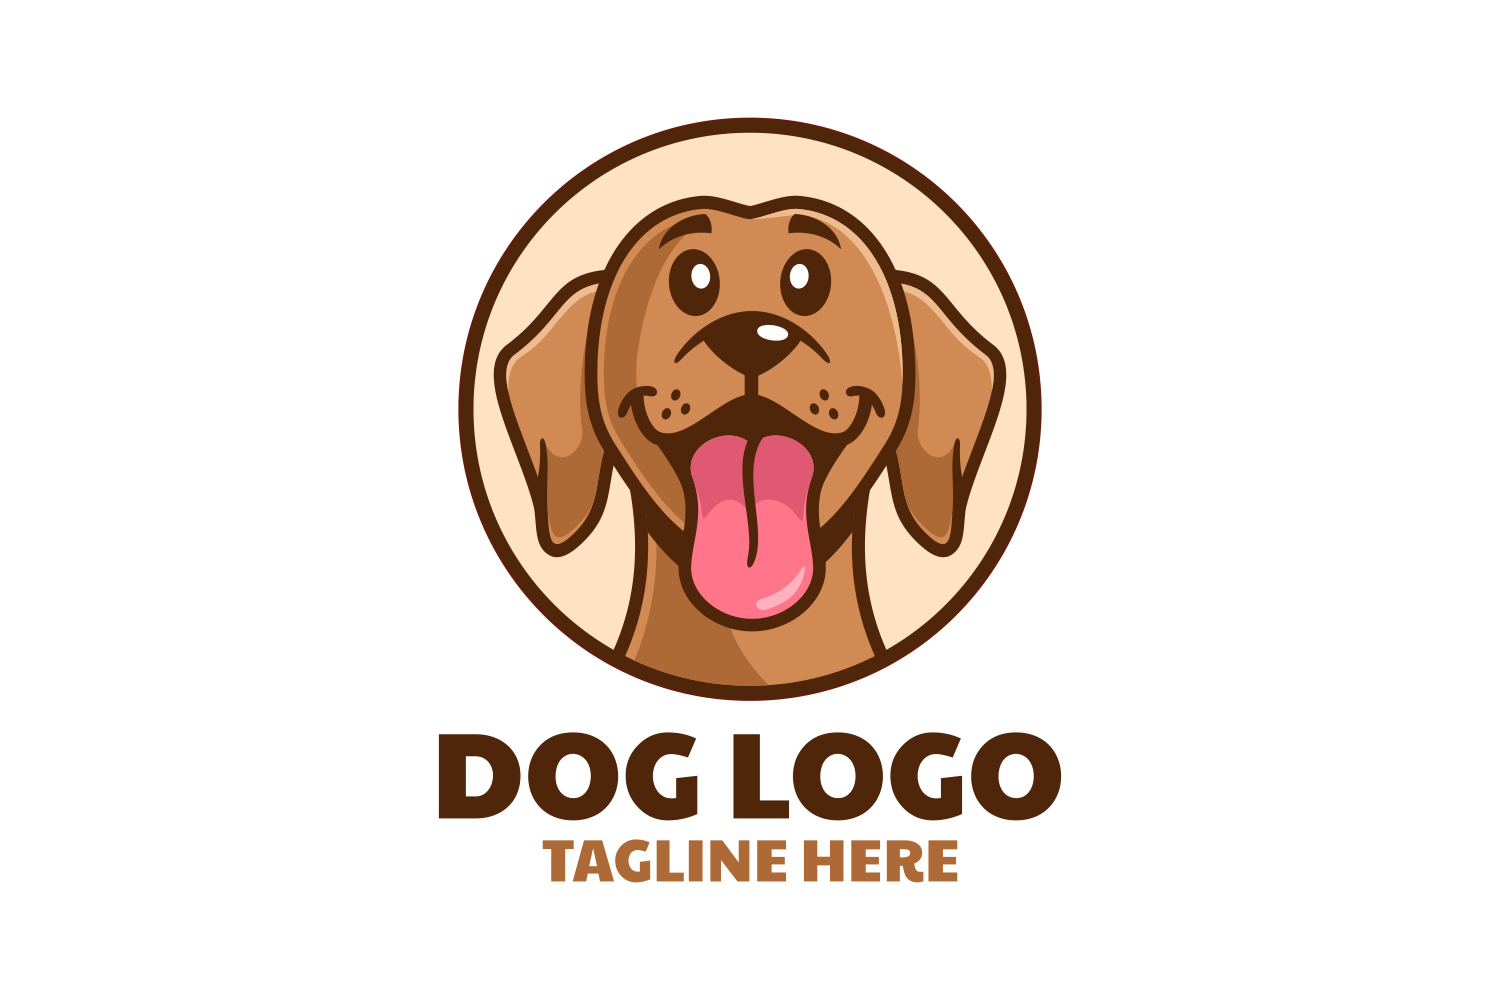 Dog Head Sticking Tongue out Logo Design Graphic by Rexcanor · Creative ...